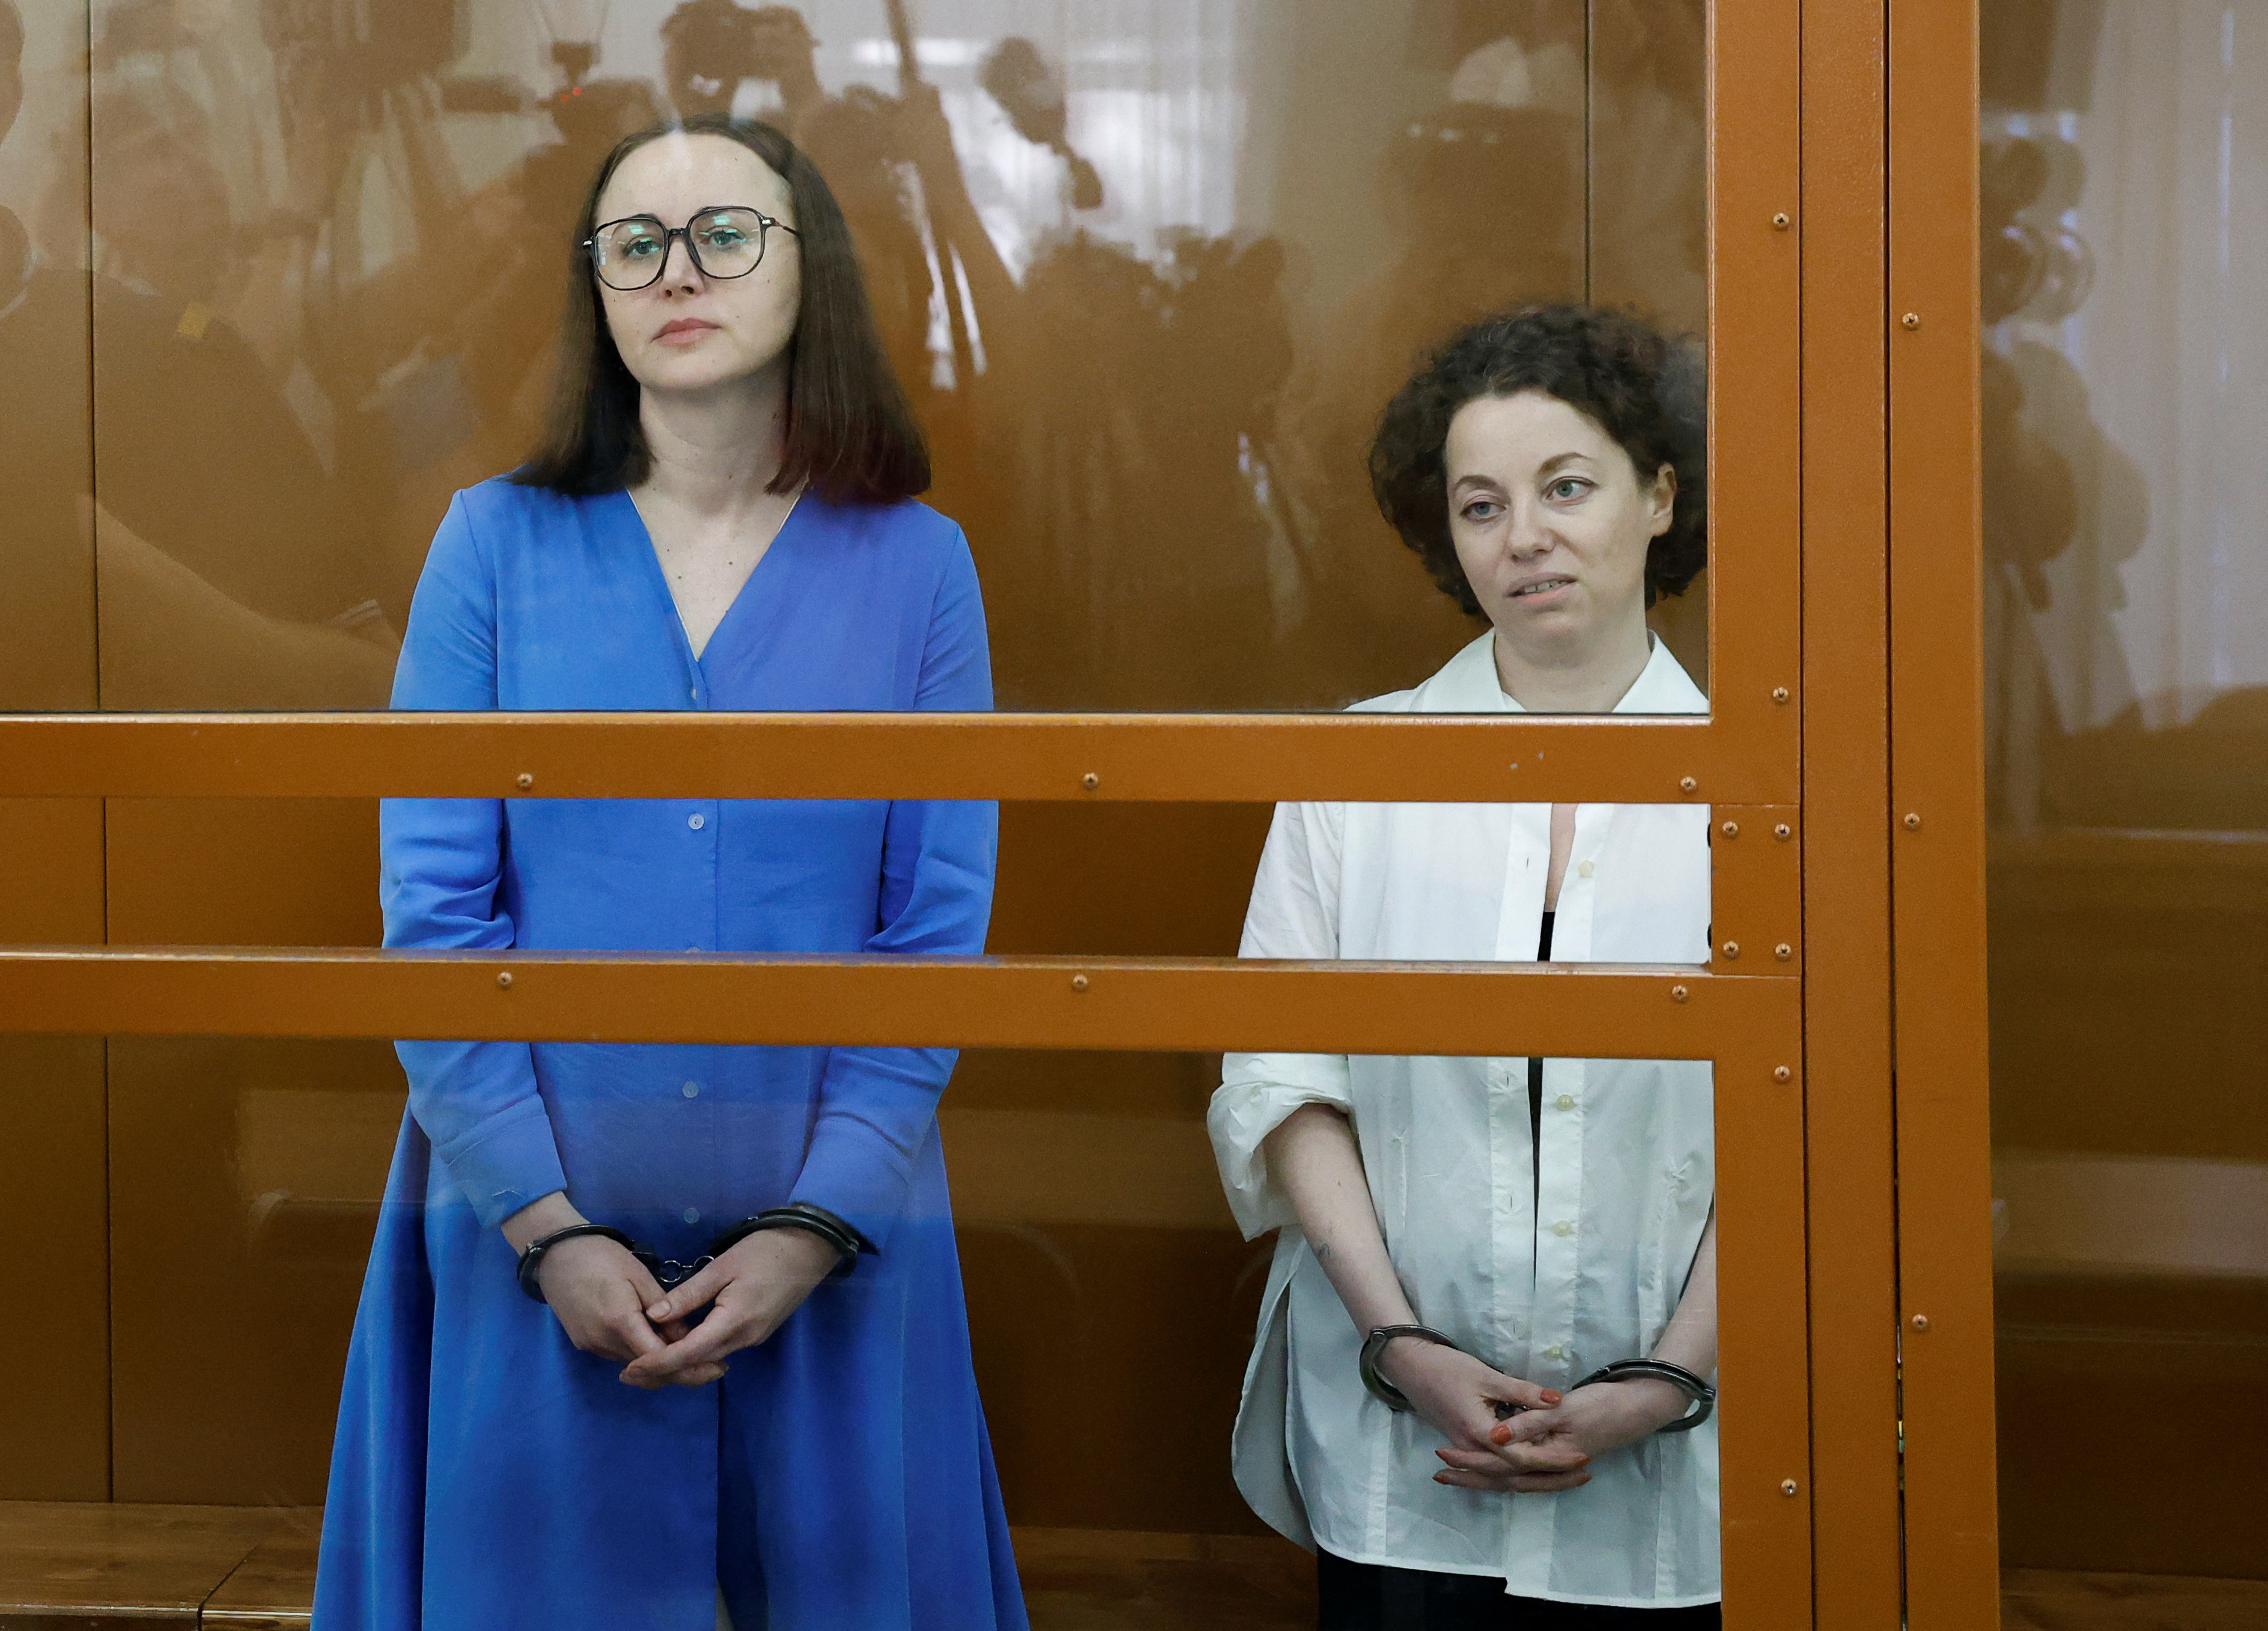 Two leading Russian theatre figures accused of justifying terrorism appear in Moscow court